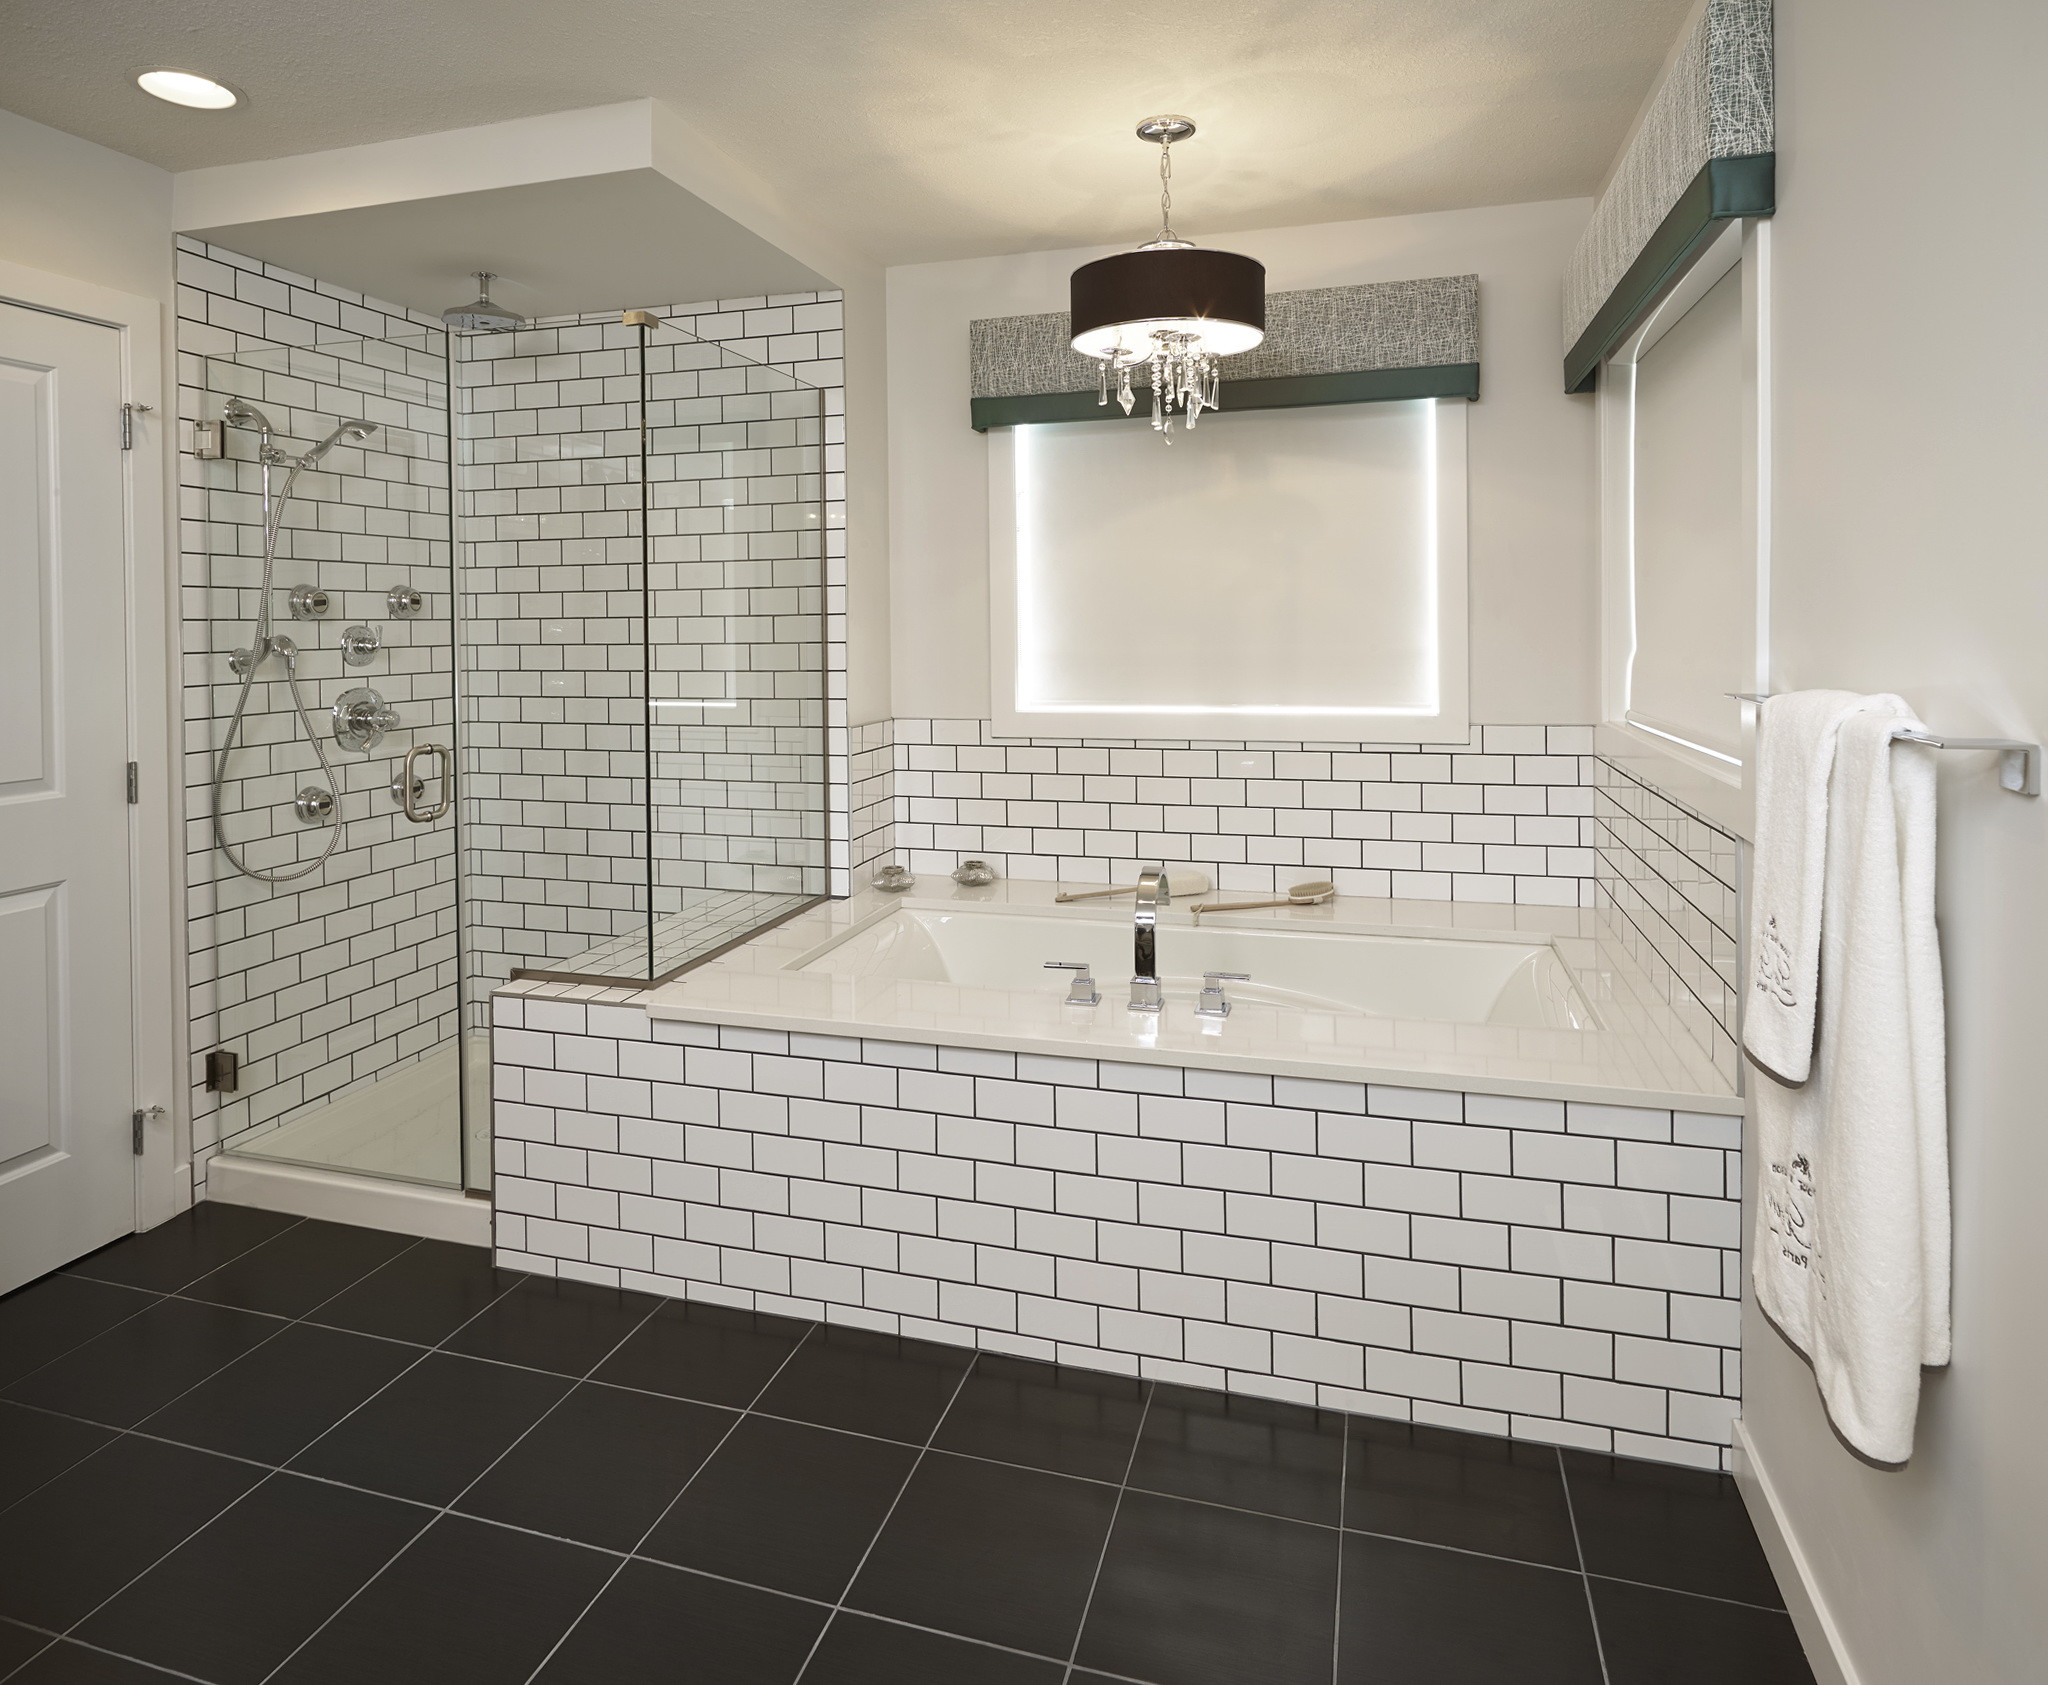 Bathroom Tiles Home Depot
 Bathroom Subway Tile Bathrooms For Your Dream Shower And